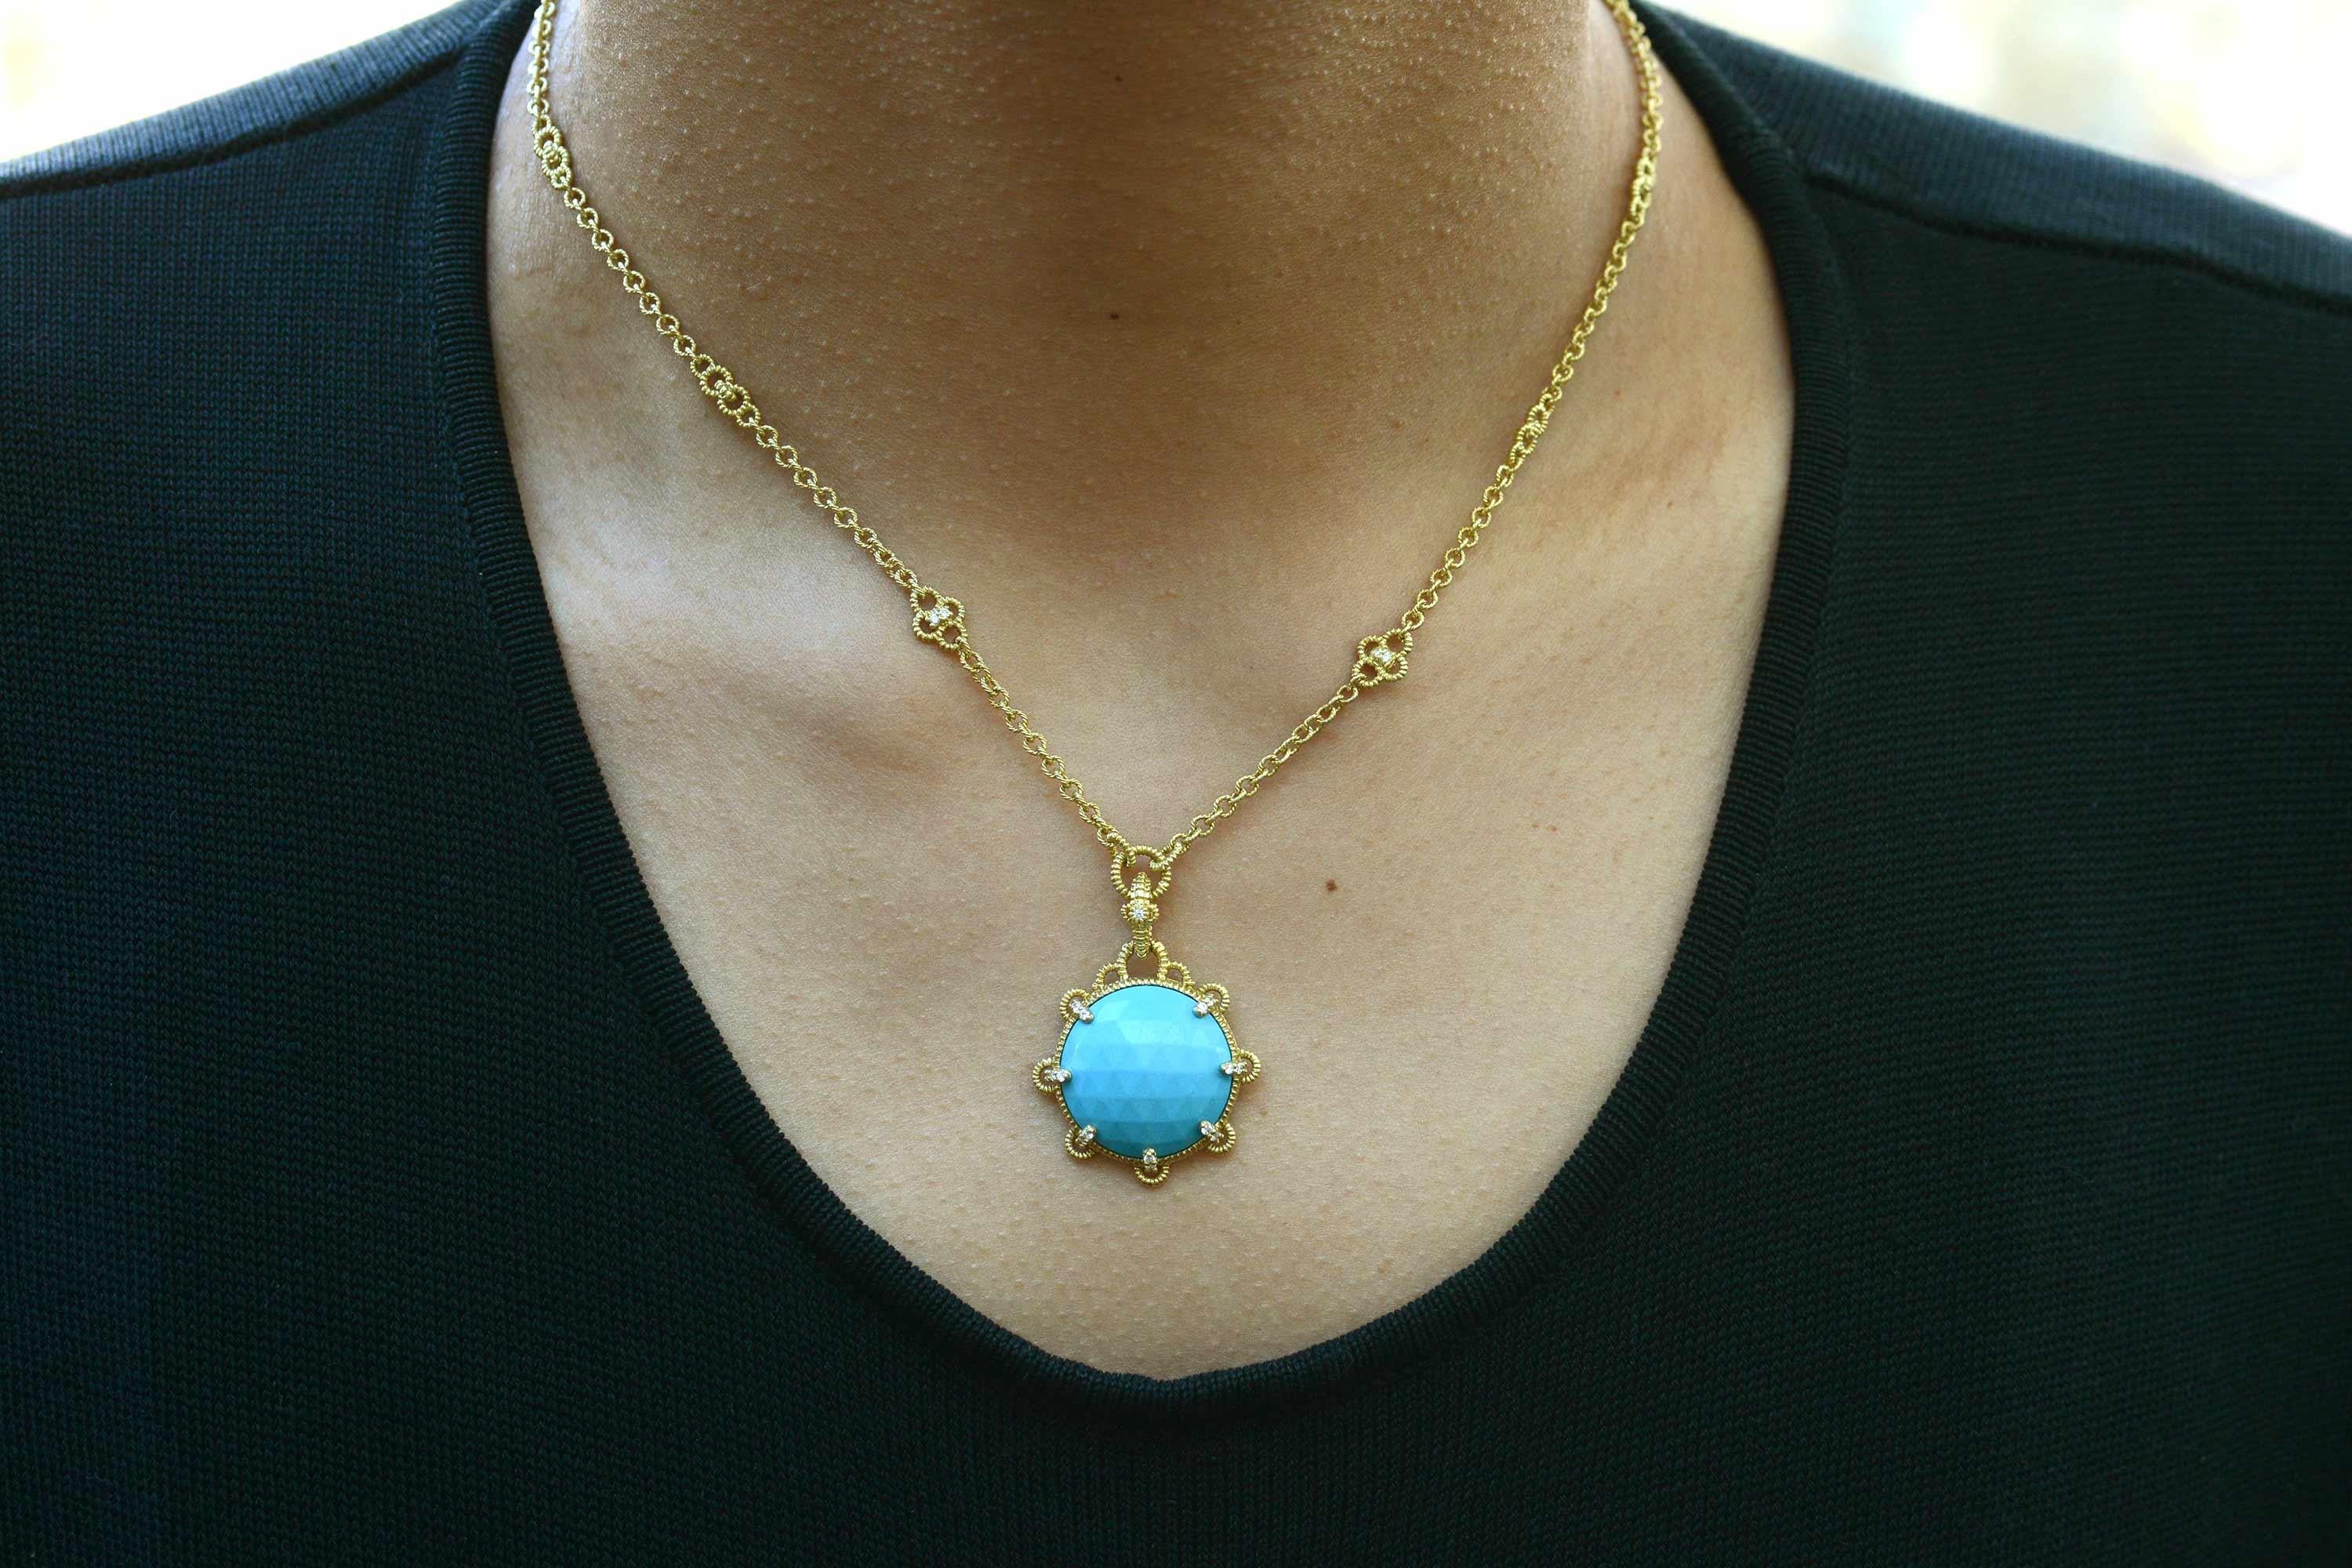 An eminently wearable Judith Ripka Turquoise Necklace fashioned of richly hued solid 18k gold. The Etruscan revival design centers on an interestingly faceted vivid, robin's egg blue turquoise held within 7 diamond encrusted claw prongs, suspended